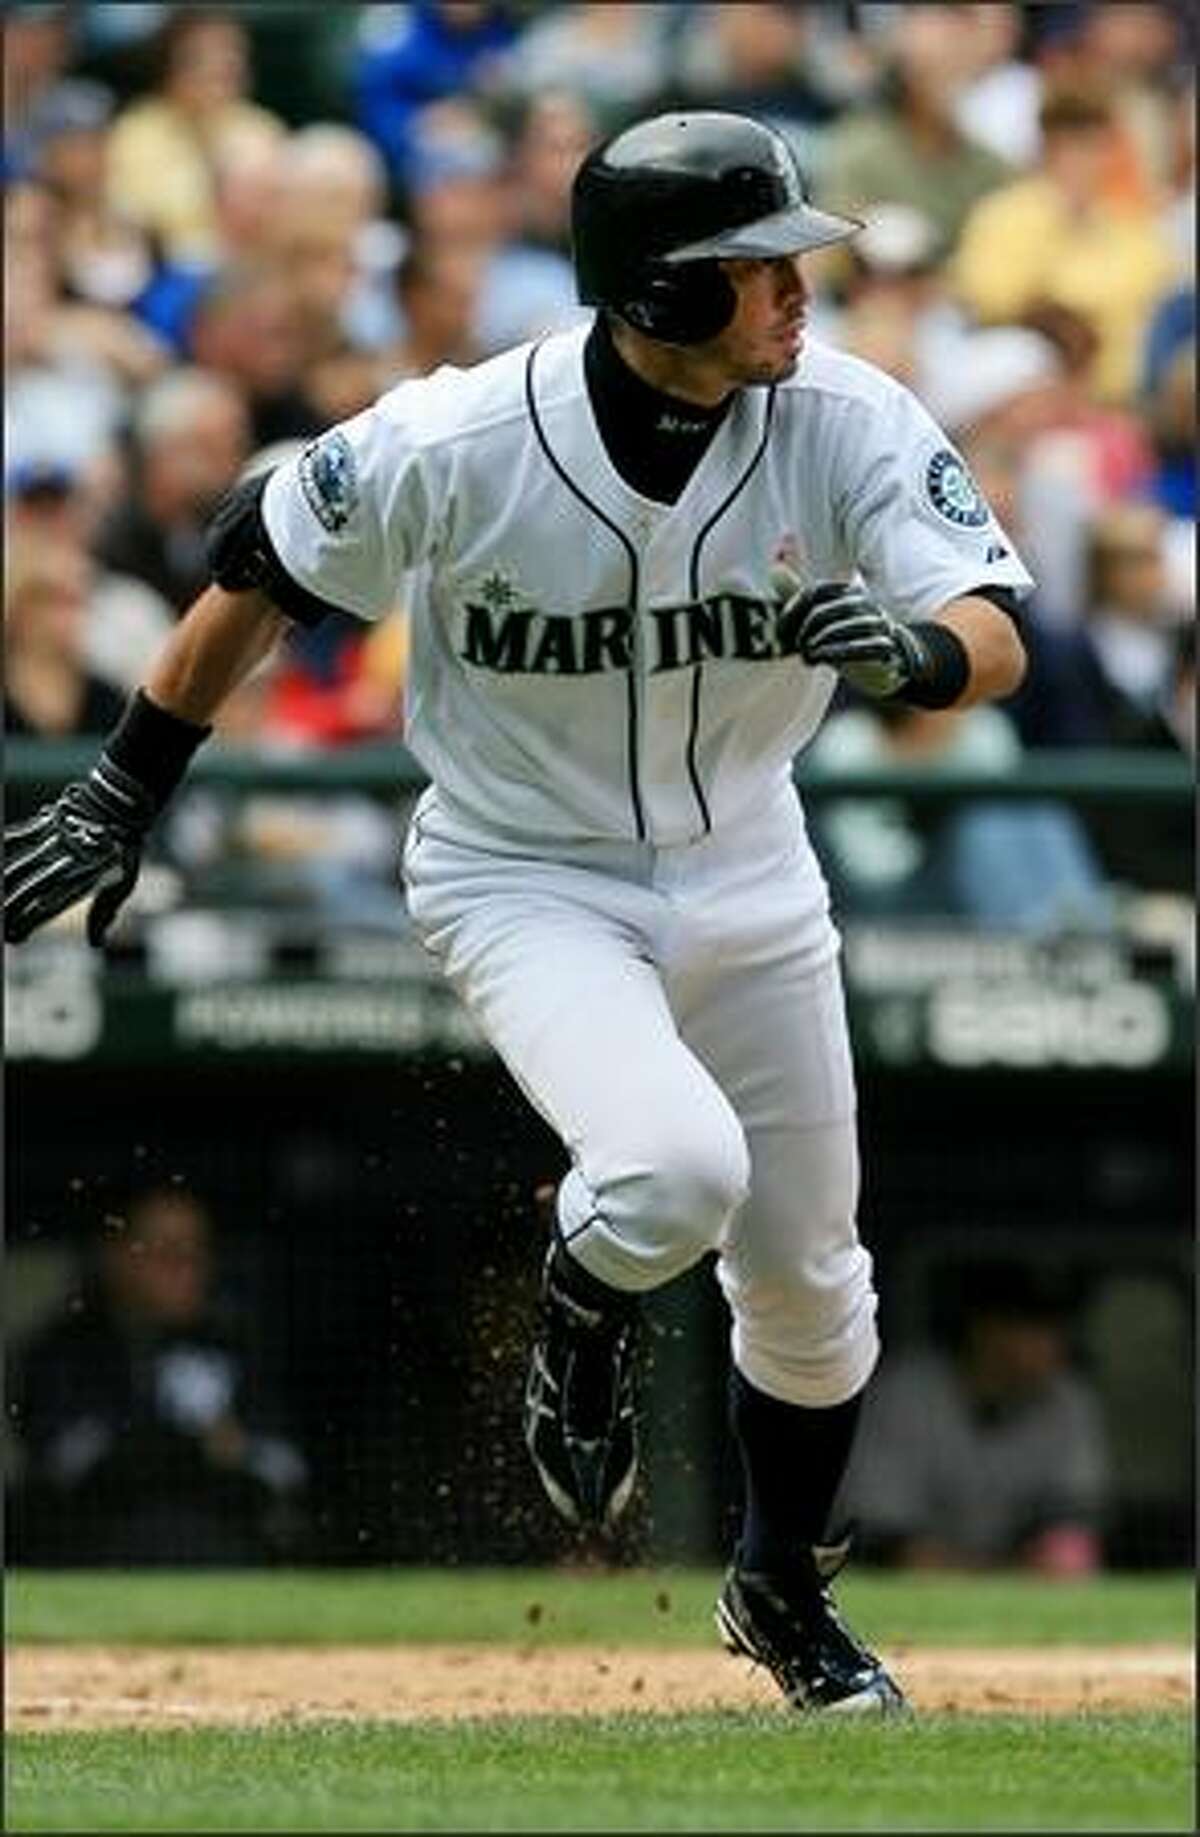 Seattle Mariners' Ichiro Suzuki hustles out a single, his first of two on the day, against New York Yankees' Andy Pettitte, during the 3rd inning. Ichiro later scored on a hit by Raul Ibanez.